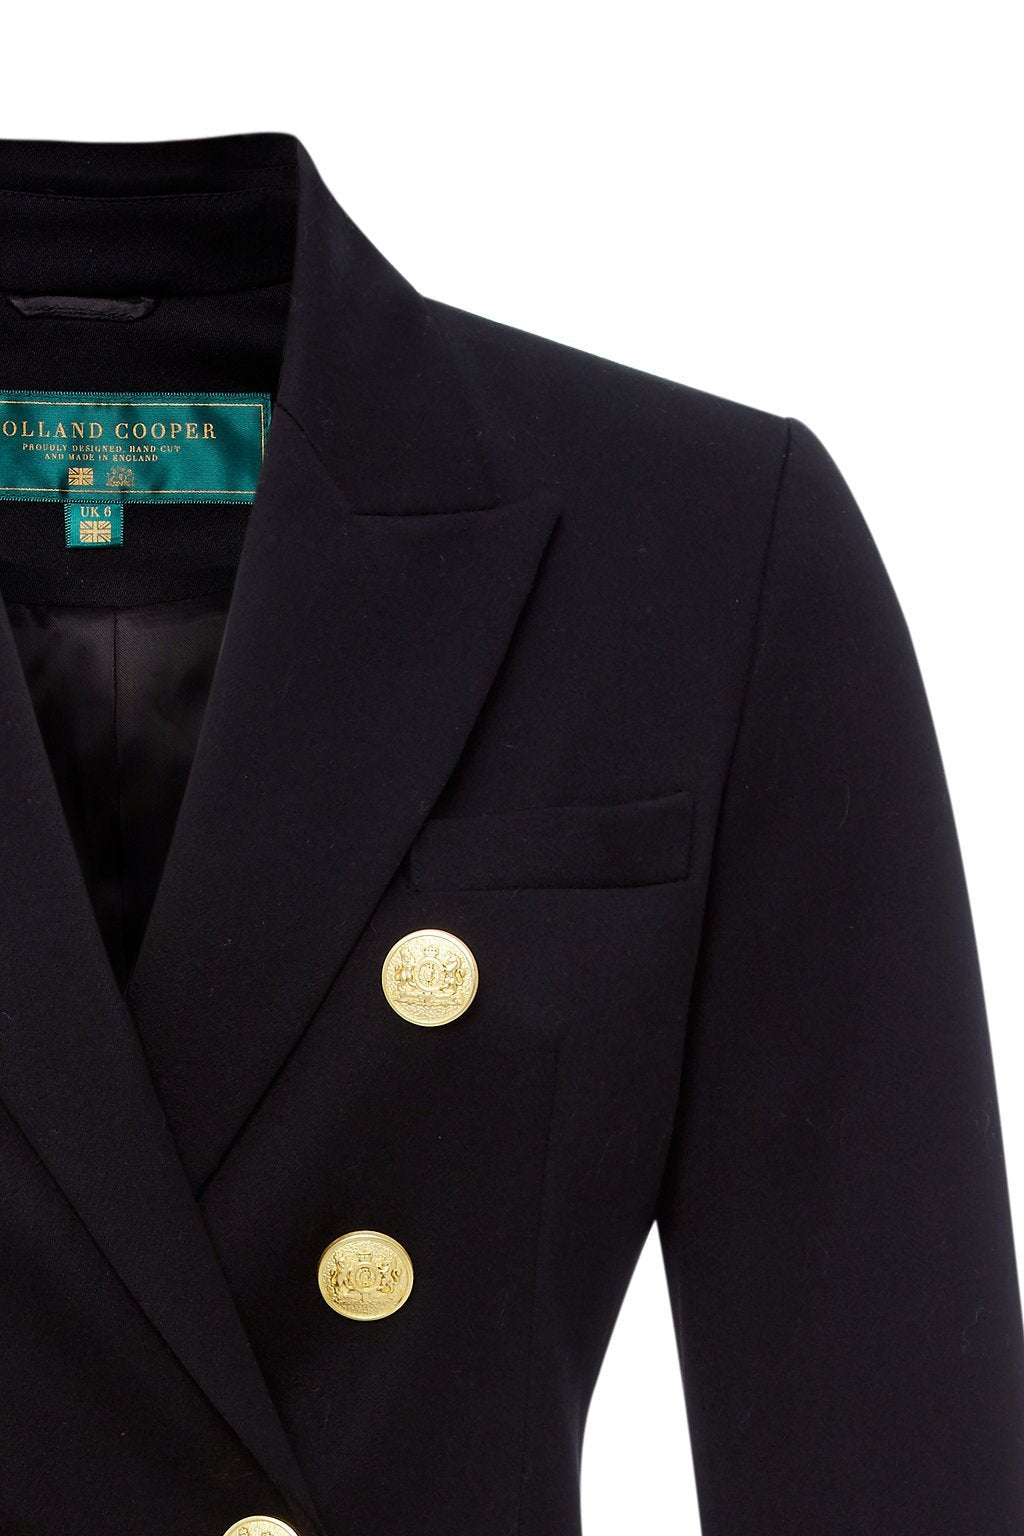 lapel and gold button detail on British made double breasted blazer that fastens with a single button hole to create a more form fitting silhouette with two pockets and gold button detailing this blazer is made from black barathea